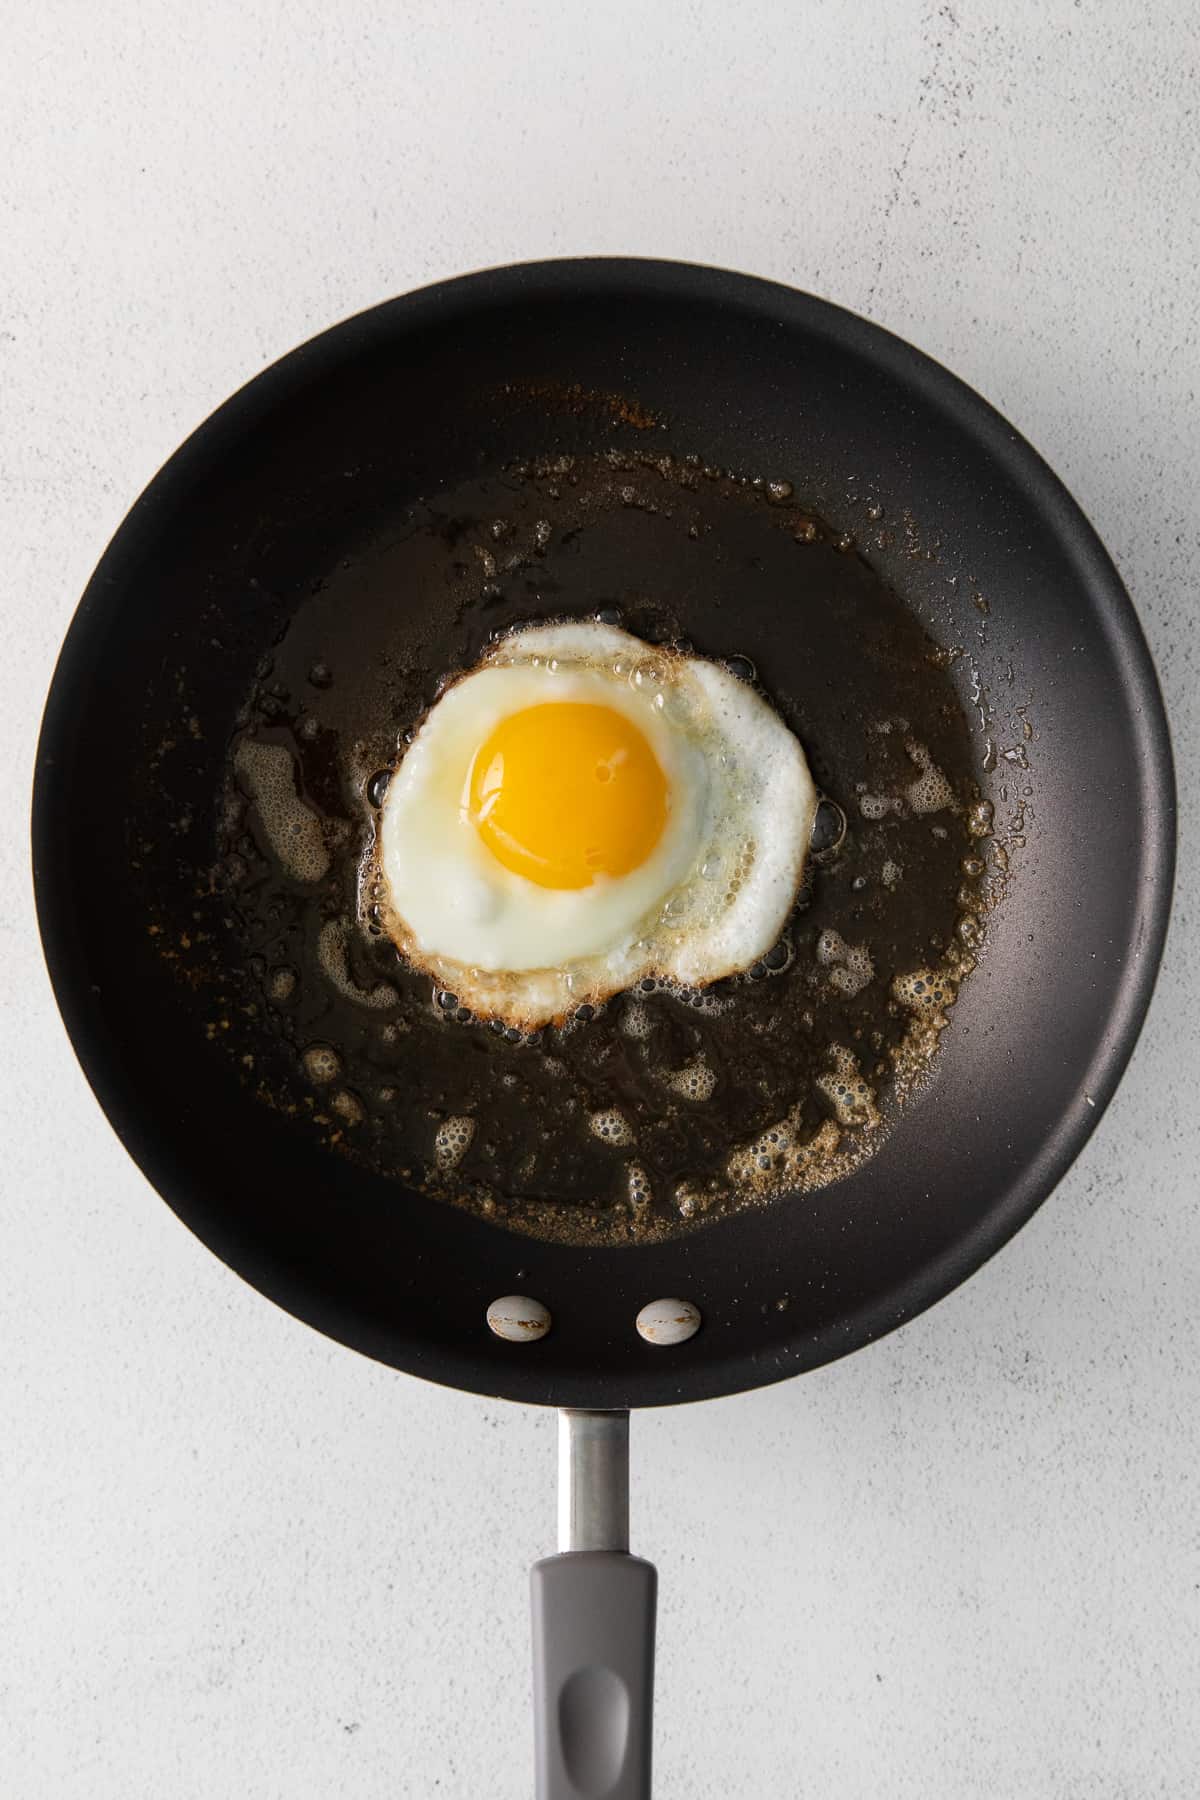 https://fitfoodiefinds.com/wp-content/uploads/2022/02/How-to-Fry-an-Egg-13-1.jpg